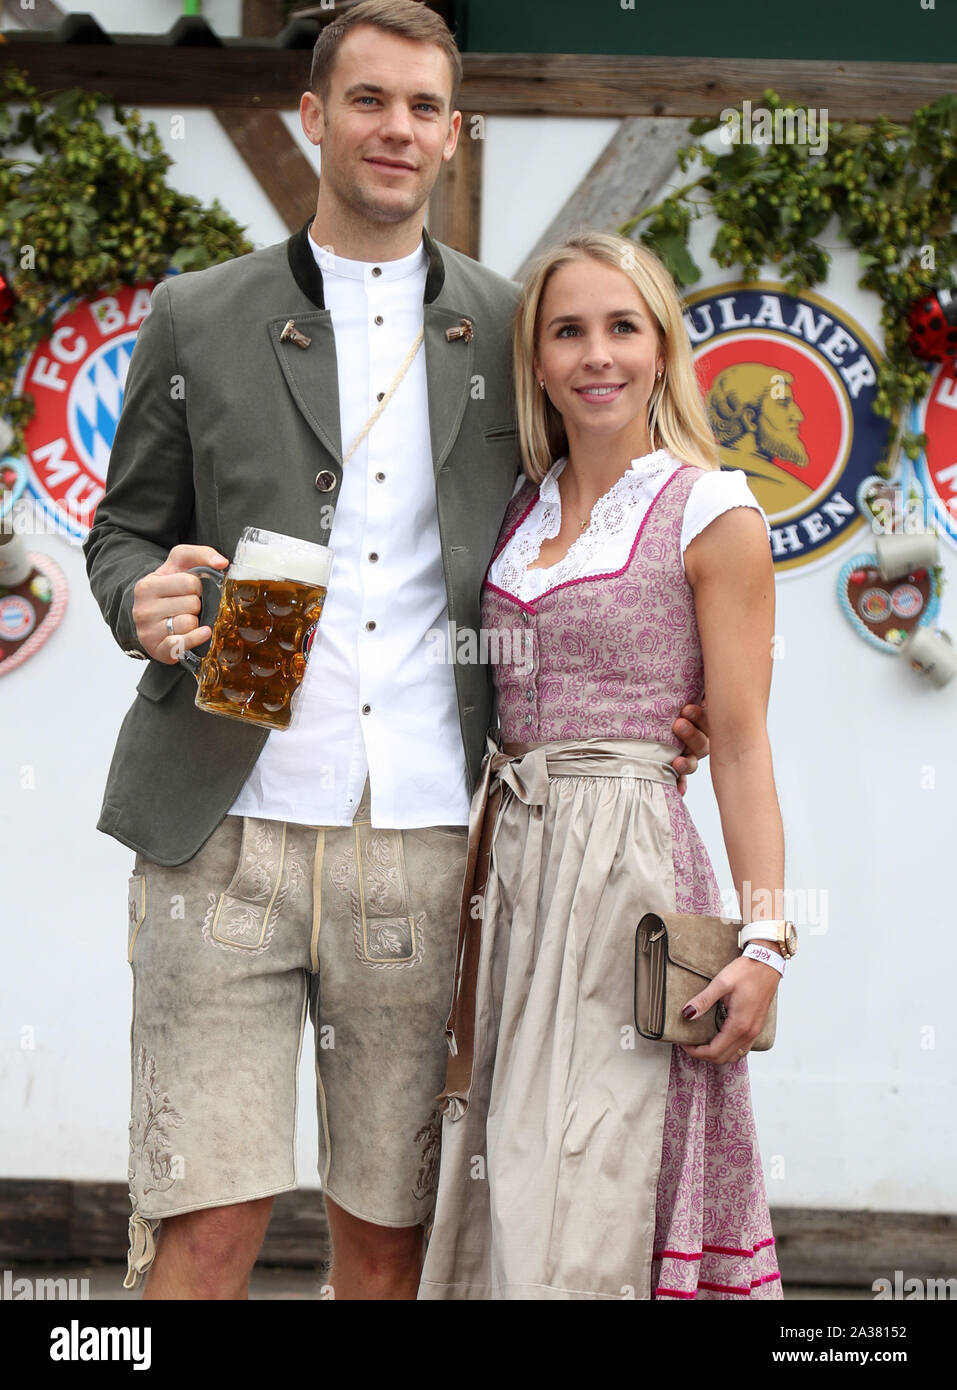 Munich, Germany. 06th Oct, 2019. Nina Weiss wife of Manuel Neuer, Team FC BAYERN MUNICH visits the beer festival Octoberfest in traditional Clothes Dirndl and Lederhose, leather 1.German Soccer League, Munich, October 06, 2019 Season 2019/2020, FCB, München, Credit: Peter Schatz/Alamy Live News Stock Photo